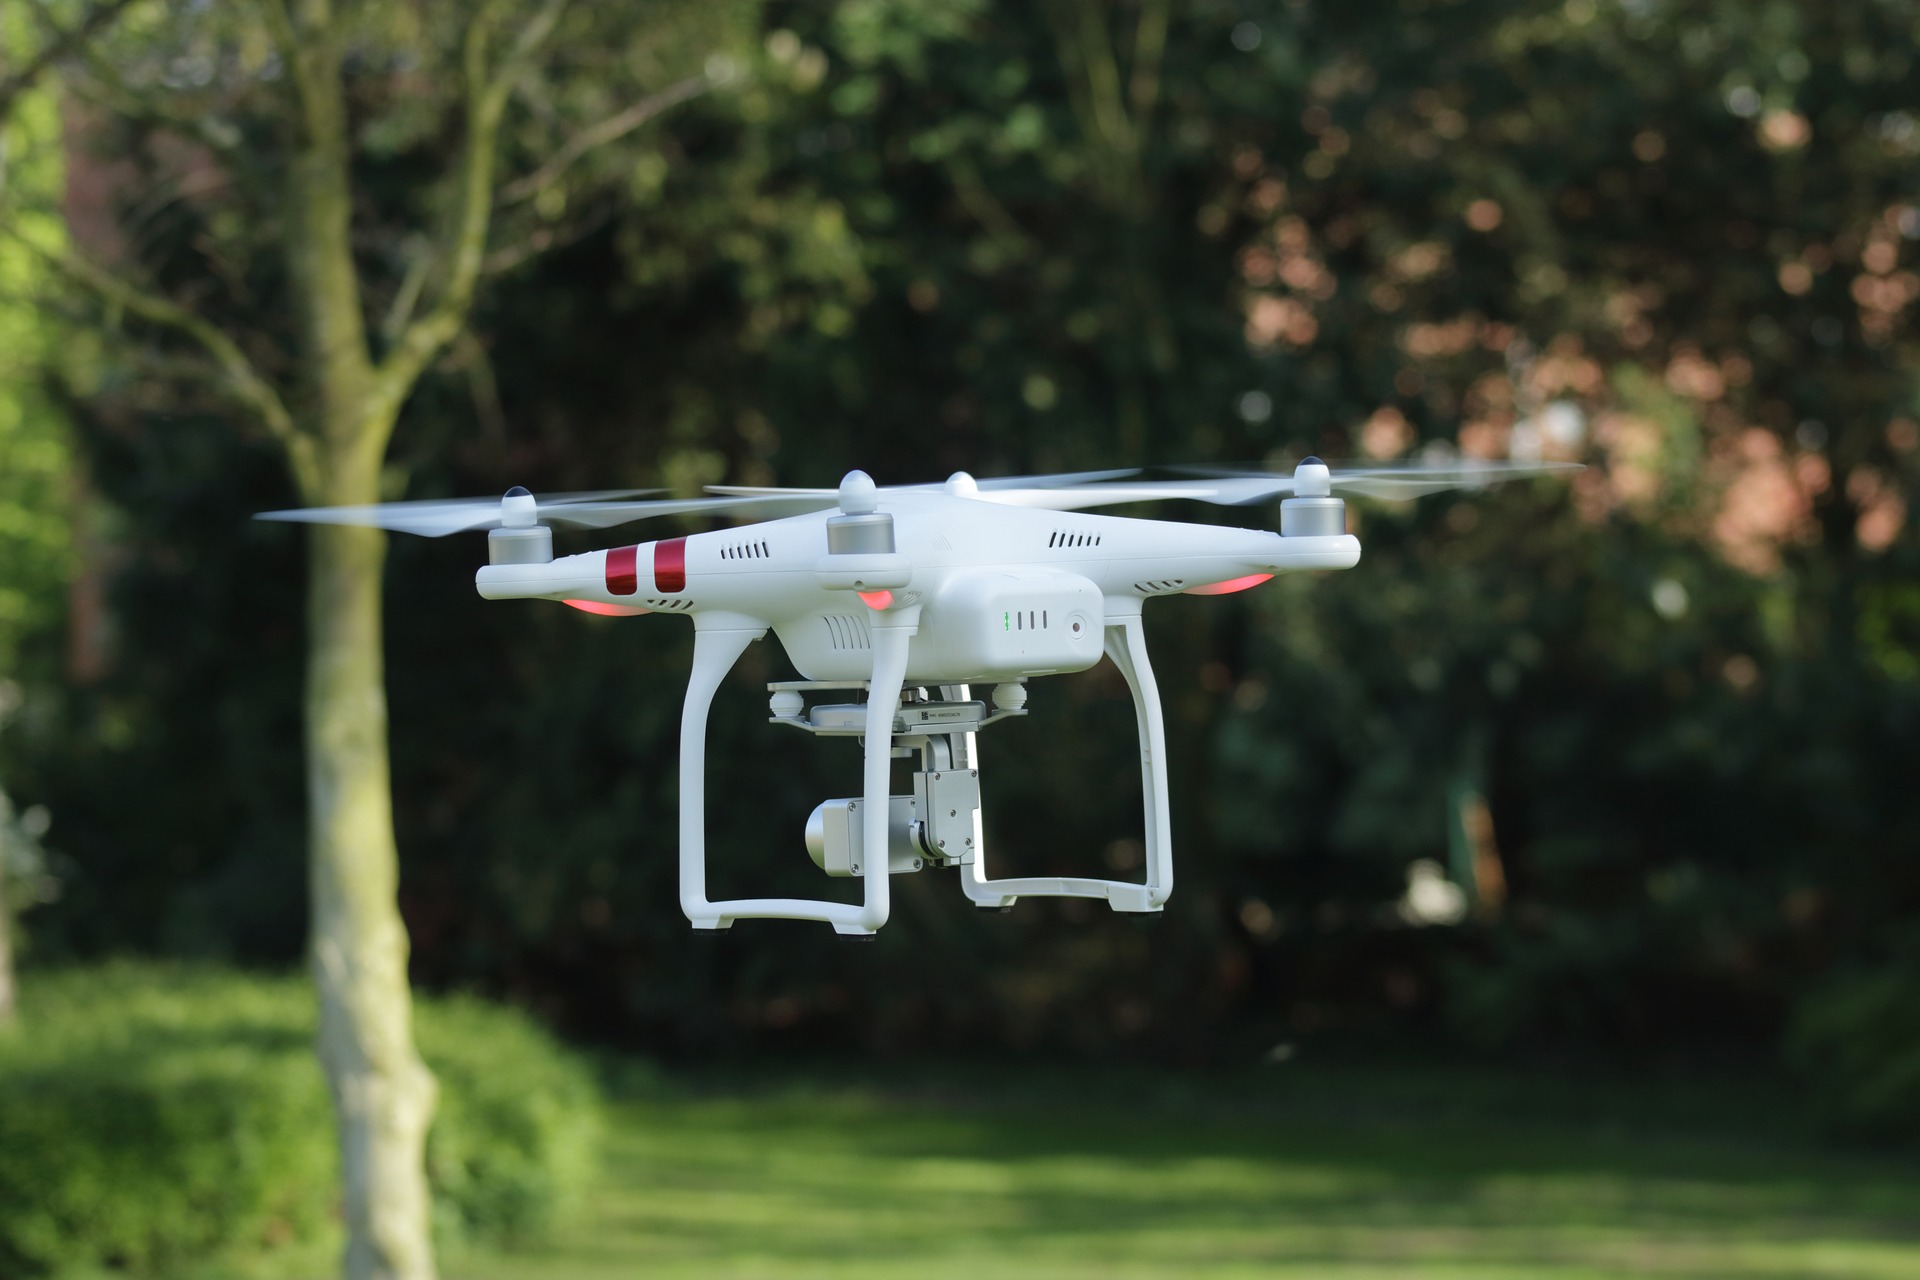 New rules will apply to drones starting 2020 in the Czech Republic, the coronavirus is partly to bla